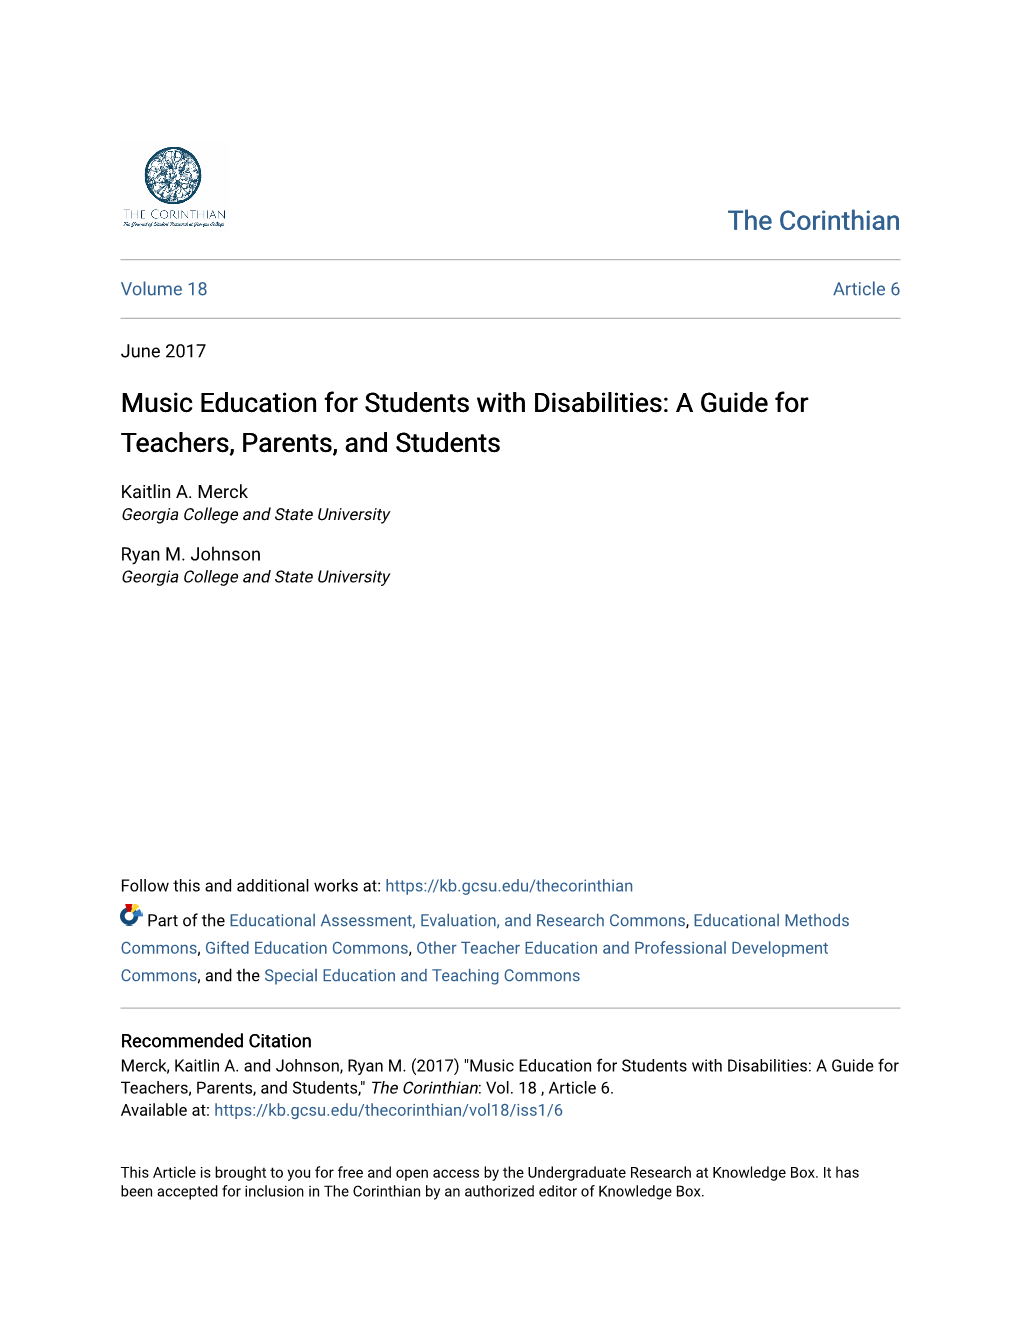 Music Education for Students with Disabilities: a Guide for Teachers, Parents, and Students